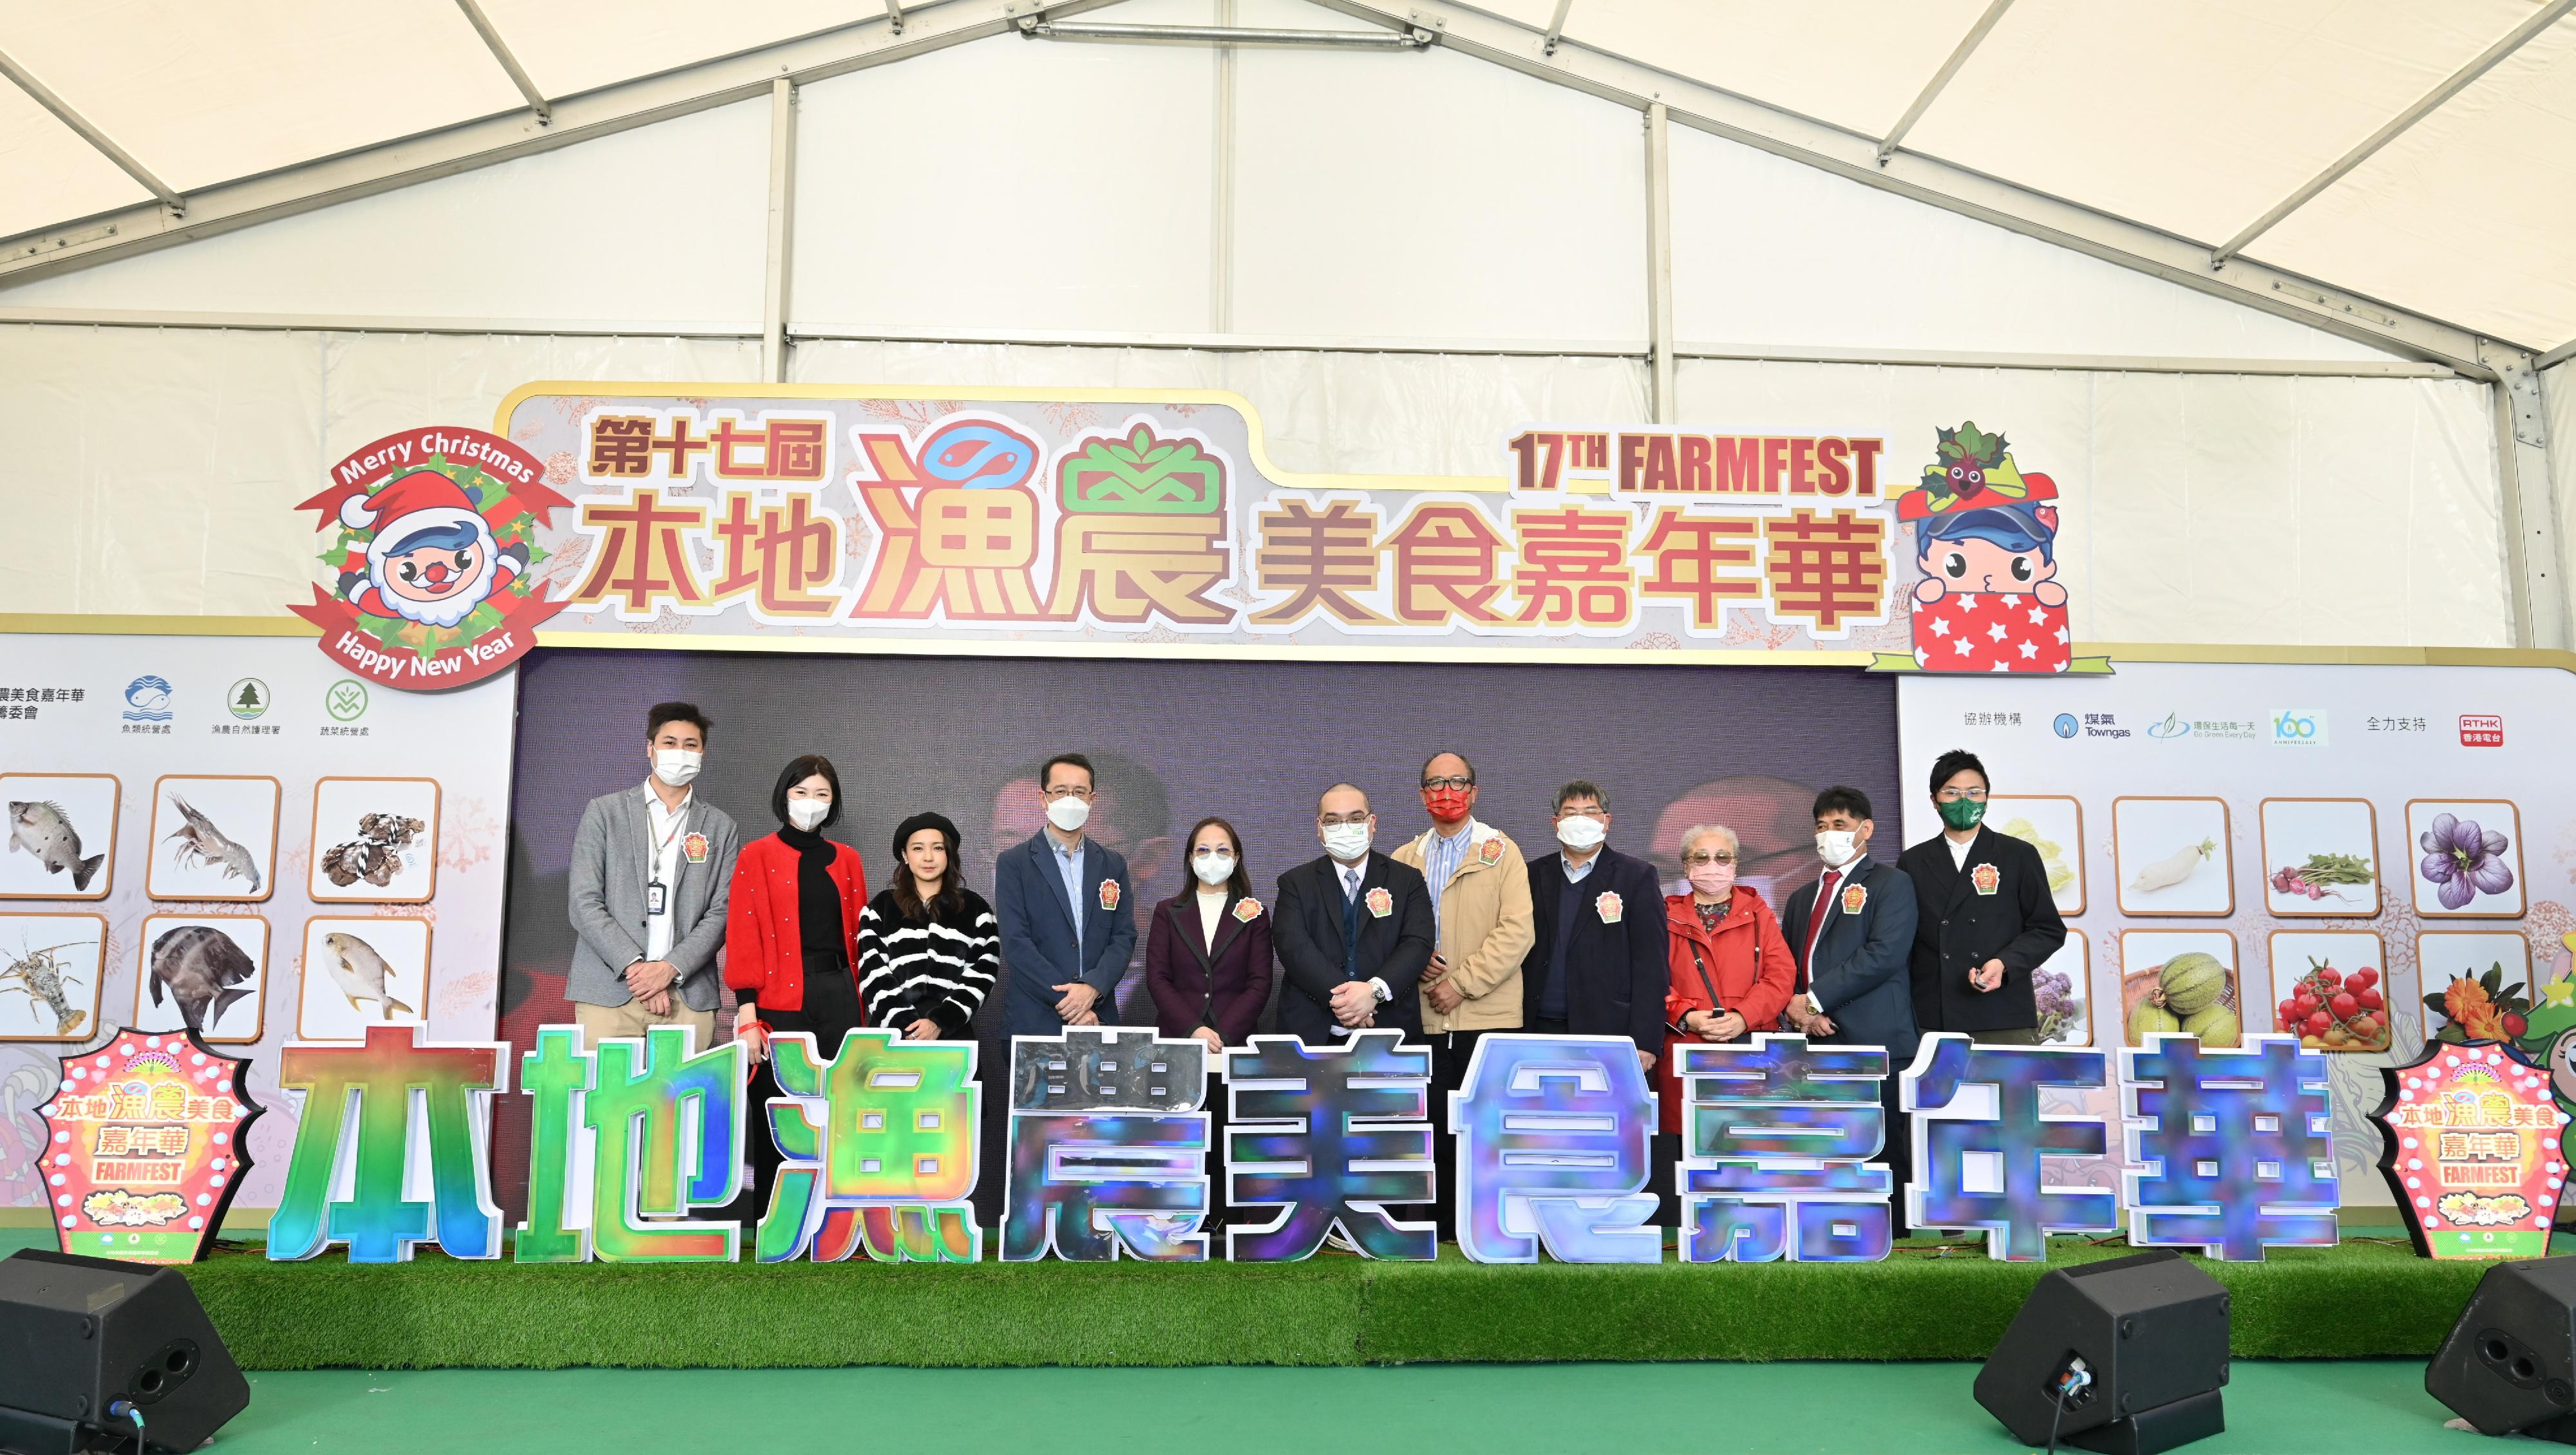 The 17th FarmFest is being held at Fa Hui Park in Mong Kok for three consecutive days between today (December 25) and December 27 to showcase a variety of local agricultural and fisheries products and other goods. Photo shows the Under Secretary for Environment and Ecology, Miss Diane Wong (fifth left); the Chairman of the Organising Committee of FarmFest, Dr Eric Lau (centre); Legislative Council members Mr Steven Ho (first left) and Ms Yung Hoi-yan (second left); the Director of Agriculture, Fisheries and Conservation, Dr Leung Siu-fai (fourth right); and other guests officiating at the opening ceremony.